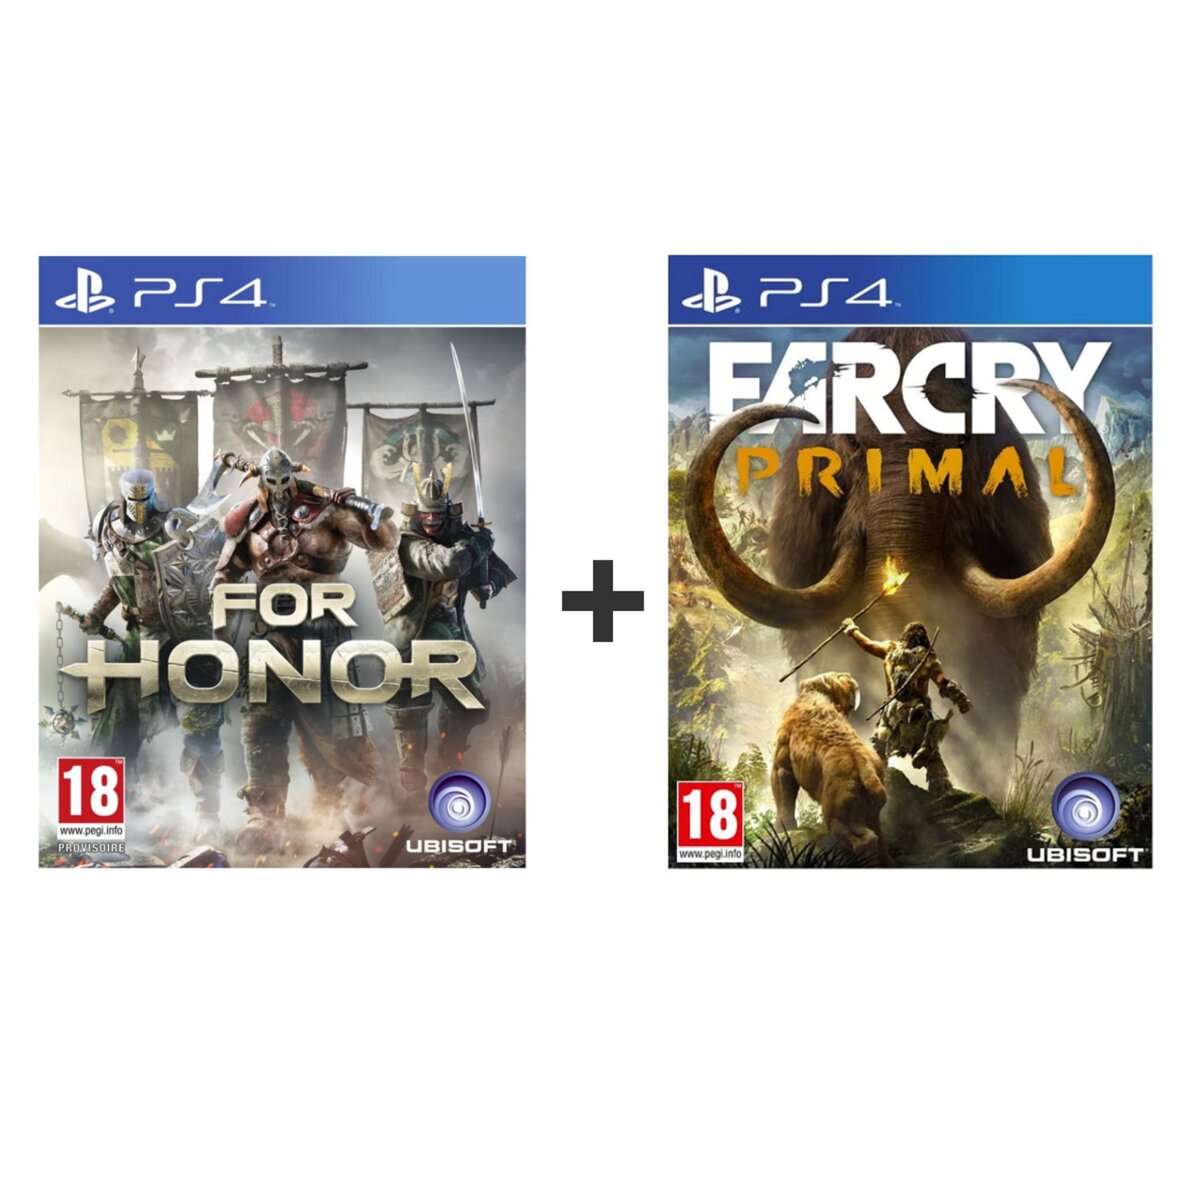 FOR HONOR + FAR CRY PRIMAL - PS4